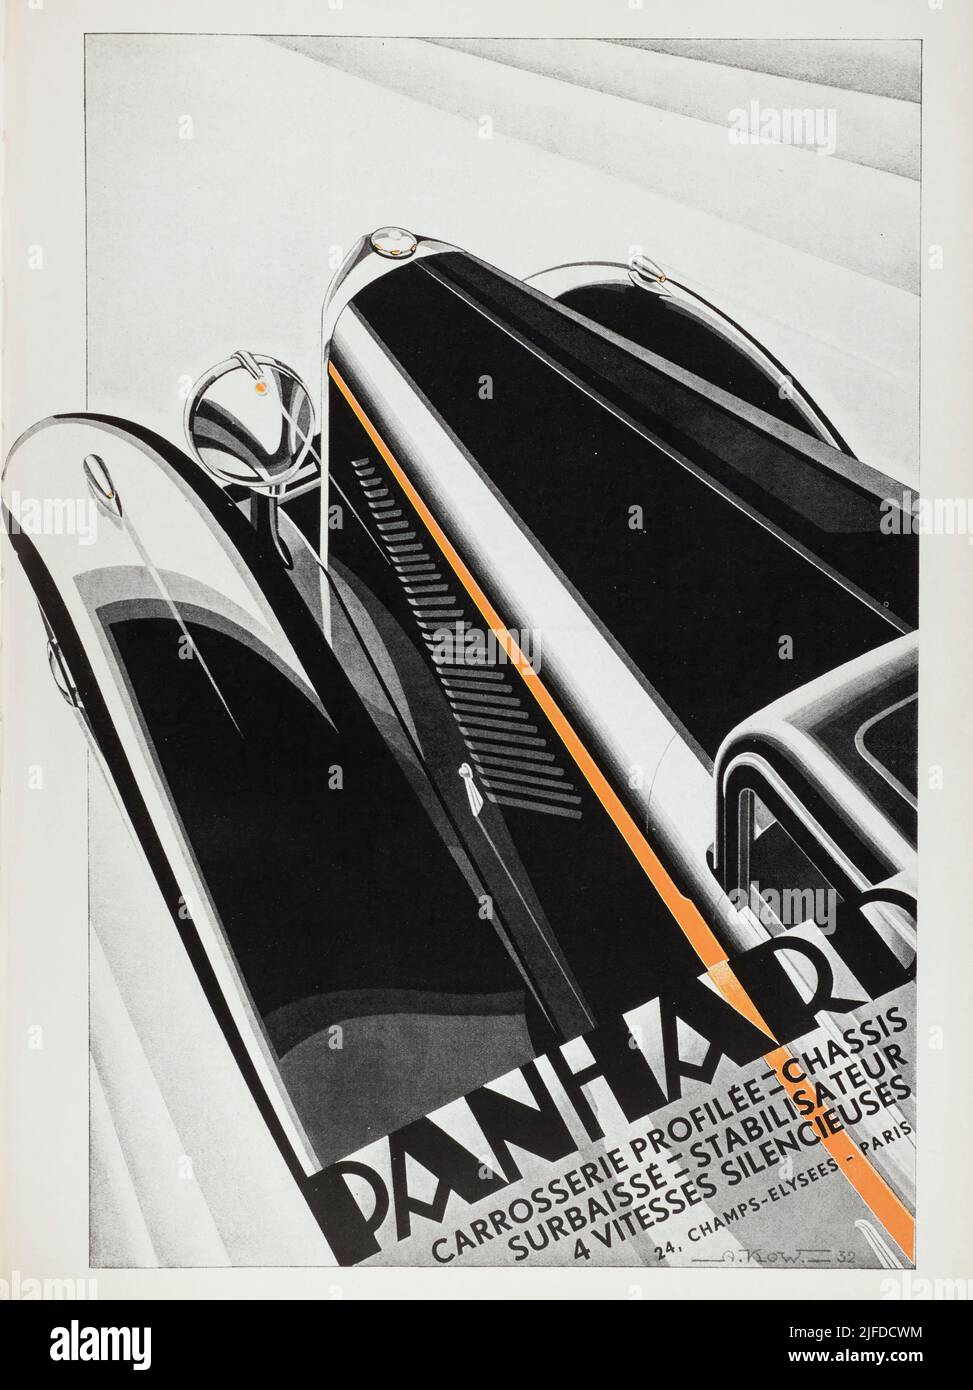 Advertising for PANHARD - Extract from 'L'Illustration Journal Universel' - French illustrated magazine - 1932 Stock Photo